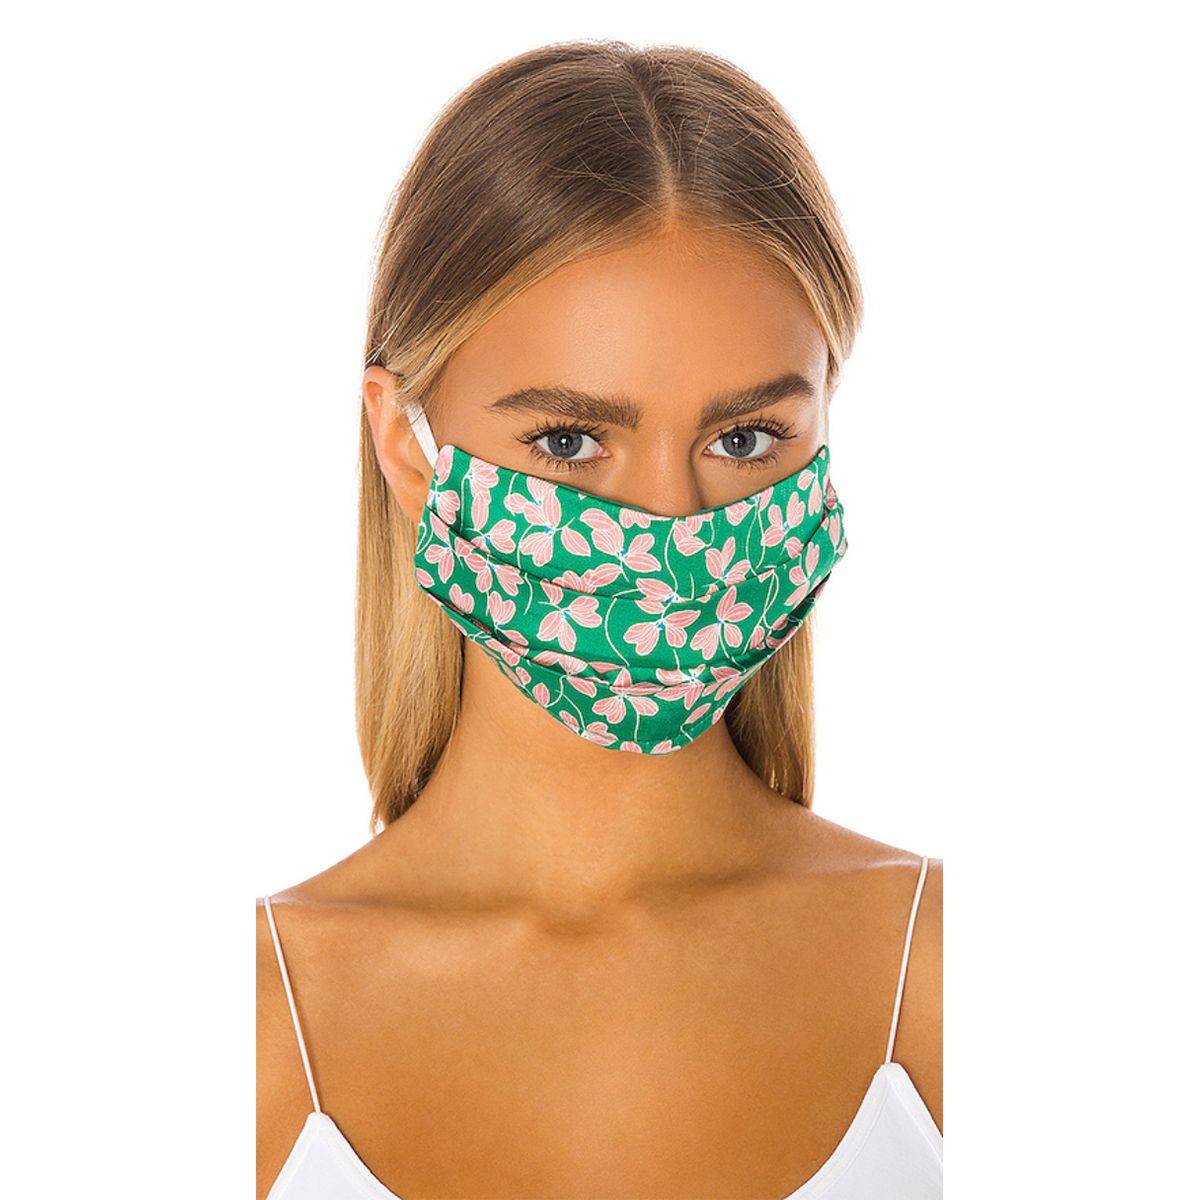 Where to Buy Fabric Face Masks